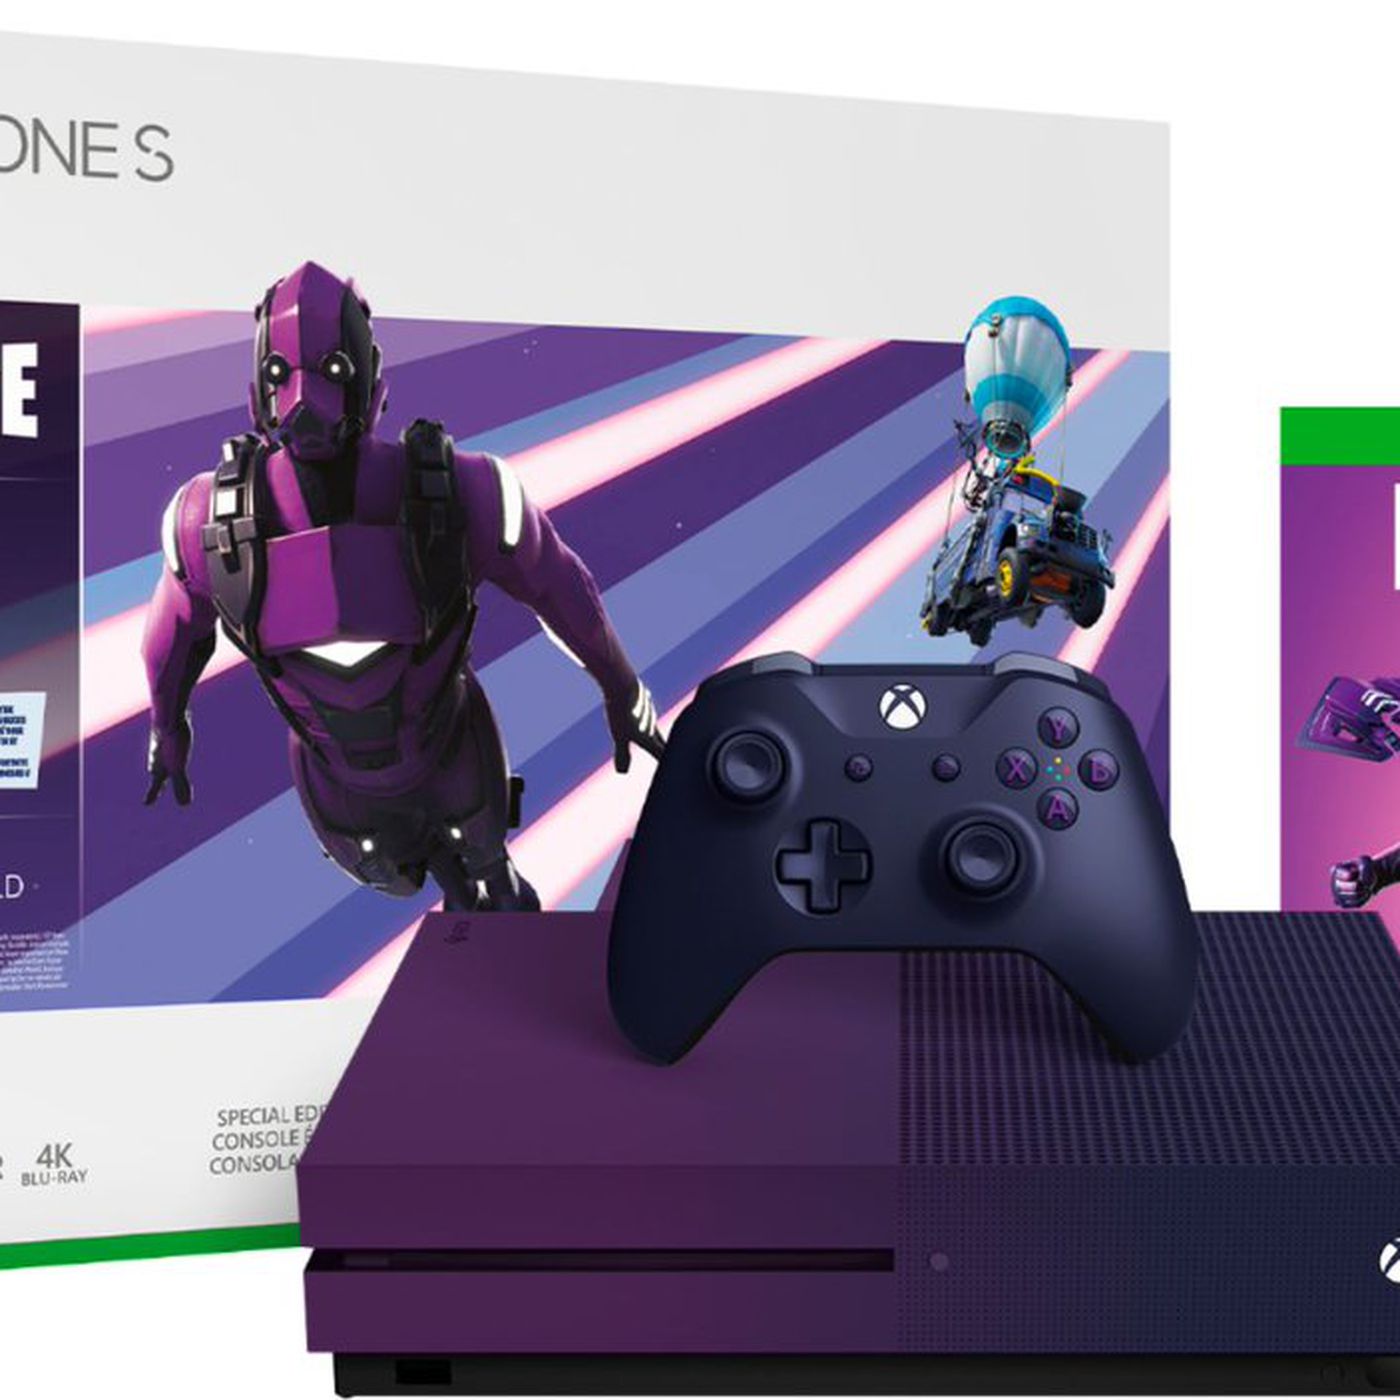 Leaked images reveal Microsoft's Xbox One S Fortnite fans - Verge